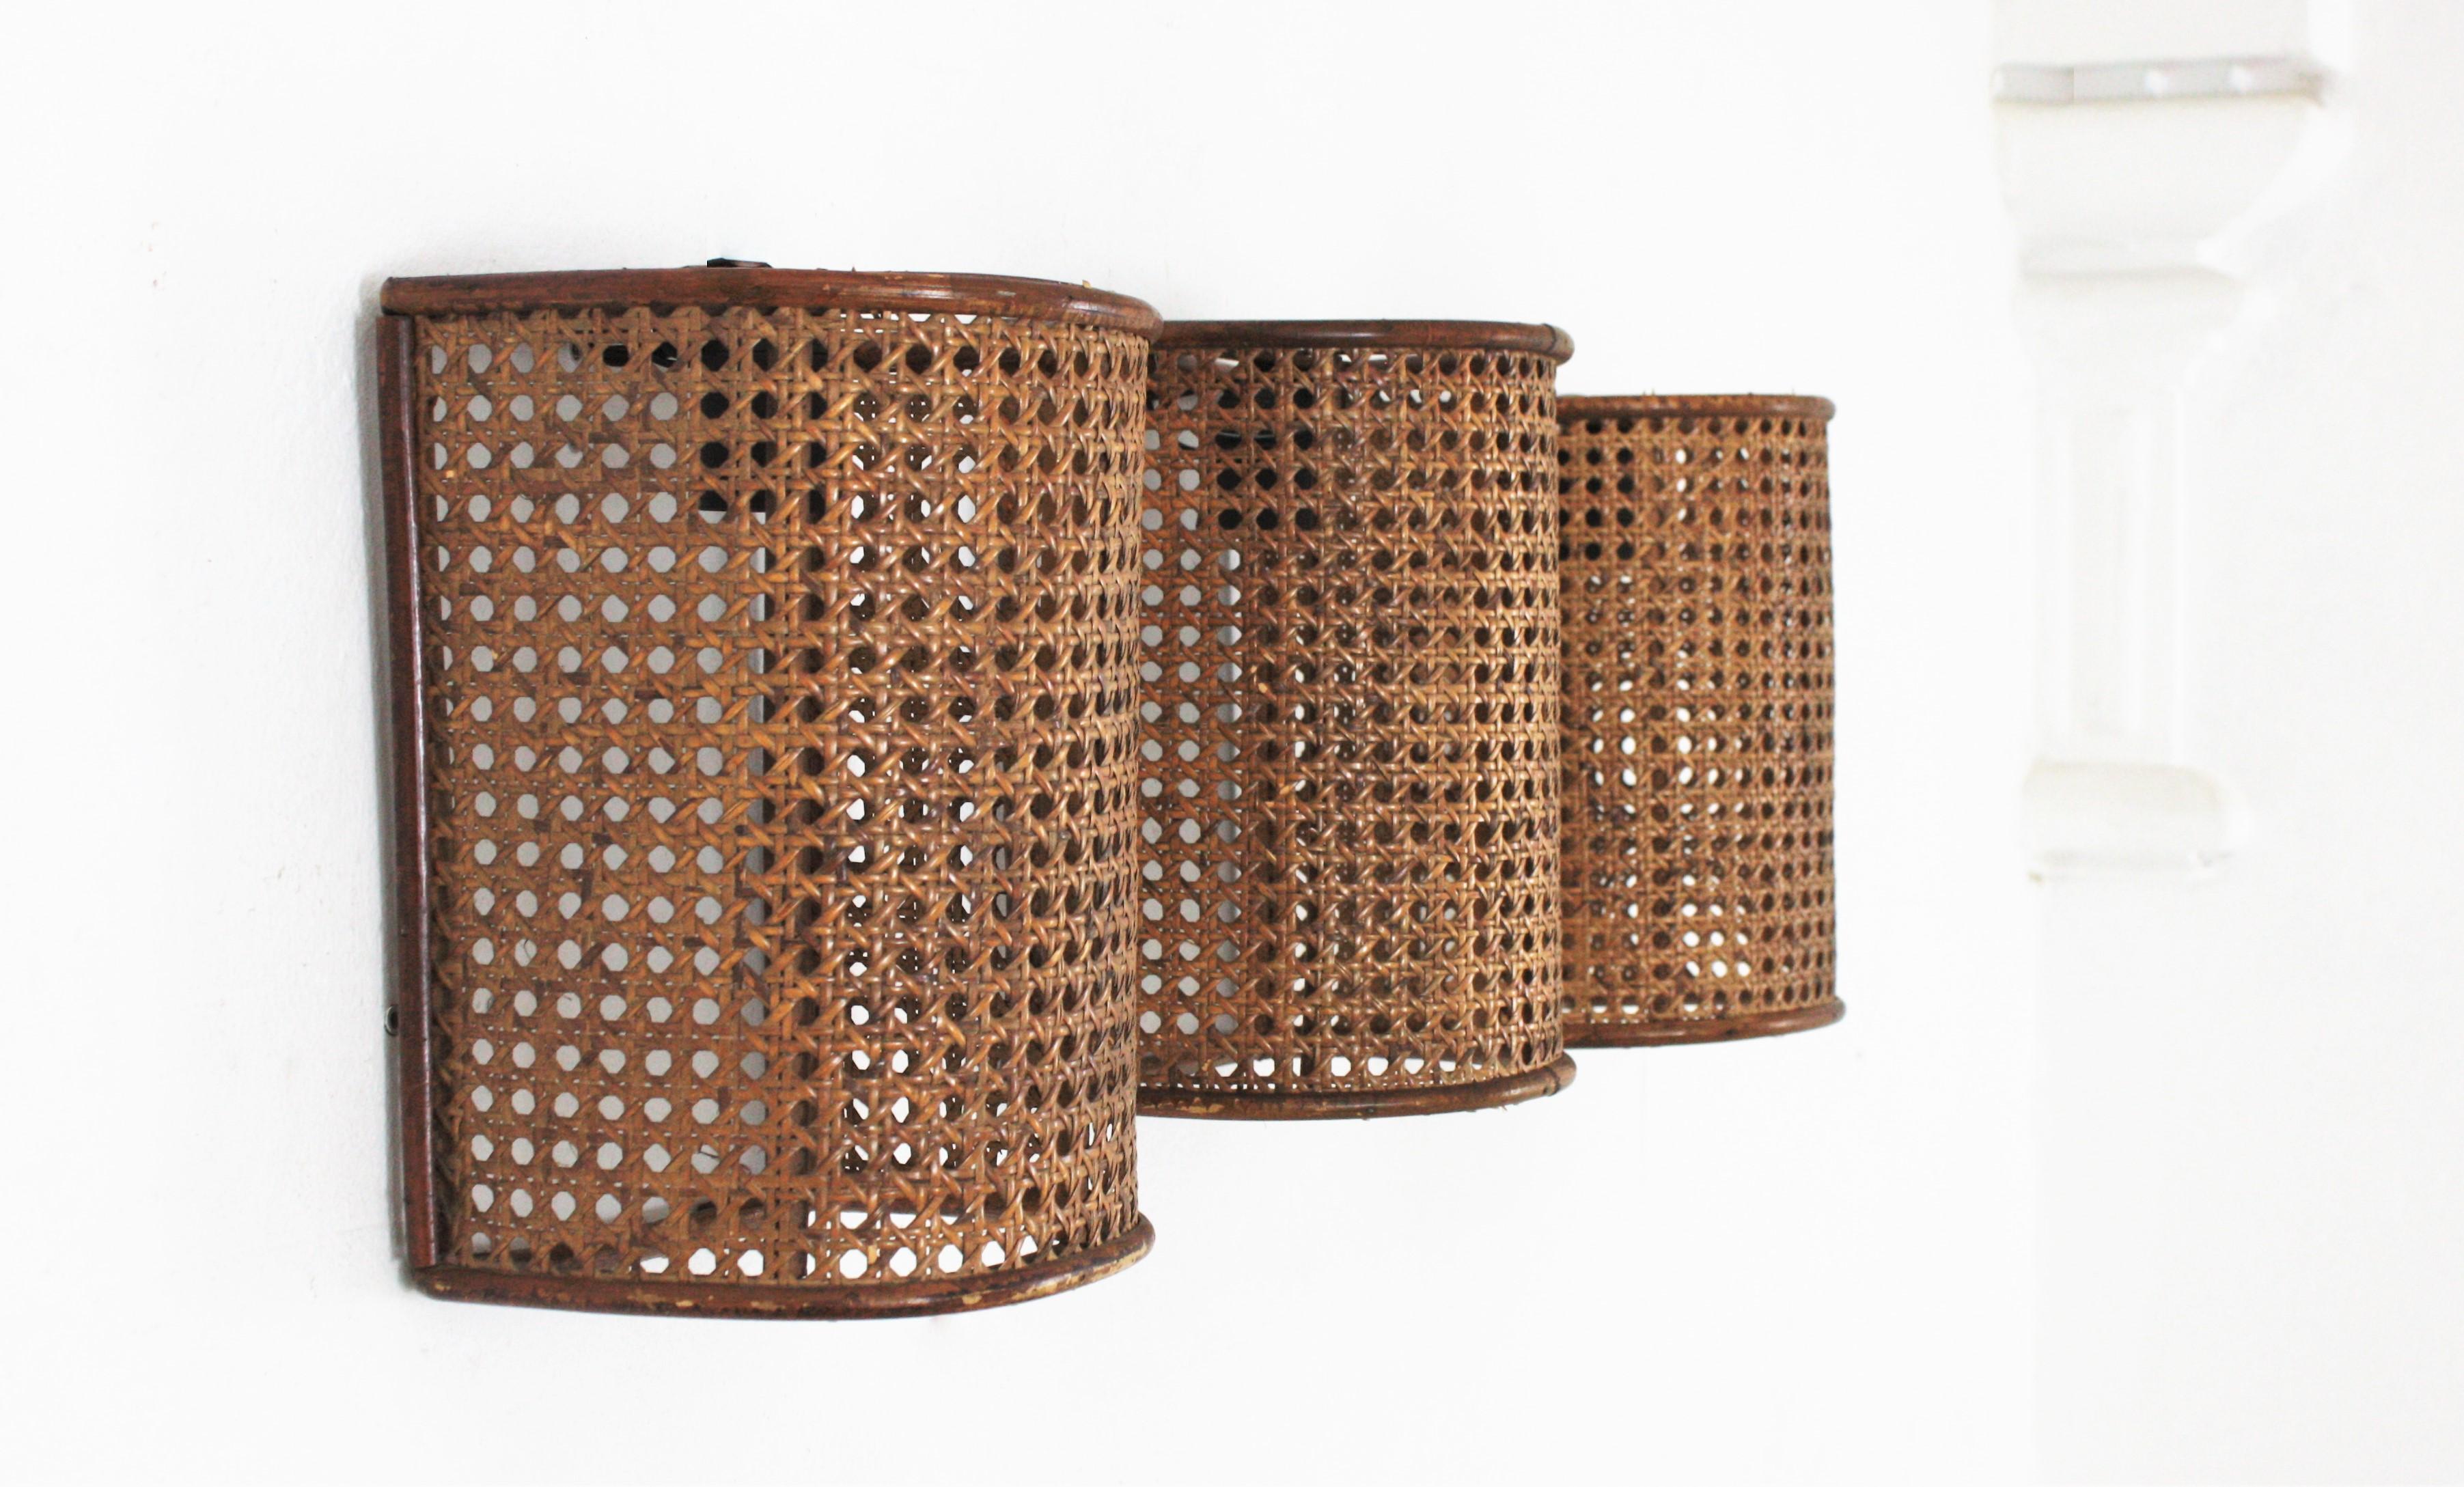 Set of three half cylinder wall lights with wicker and rattan woven shades, Italy, 1960s.
These light fixtures are made with wicker basket weave panel on a rattan semi cylindrical structure.
They will be the perfect choice to add a Modernist but